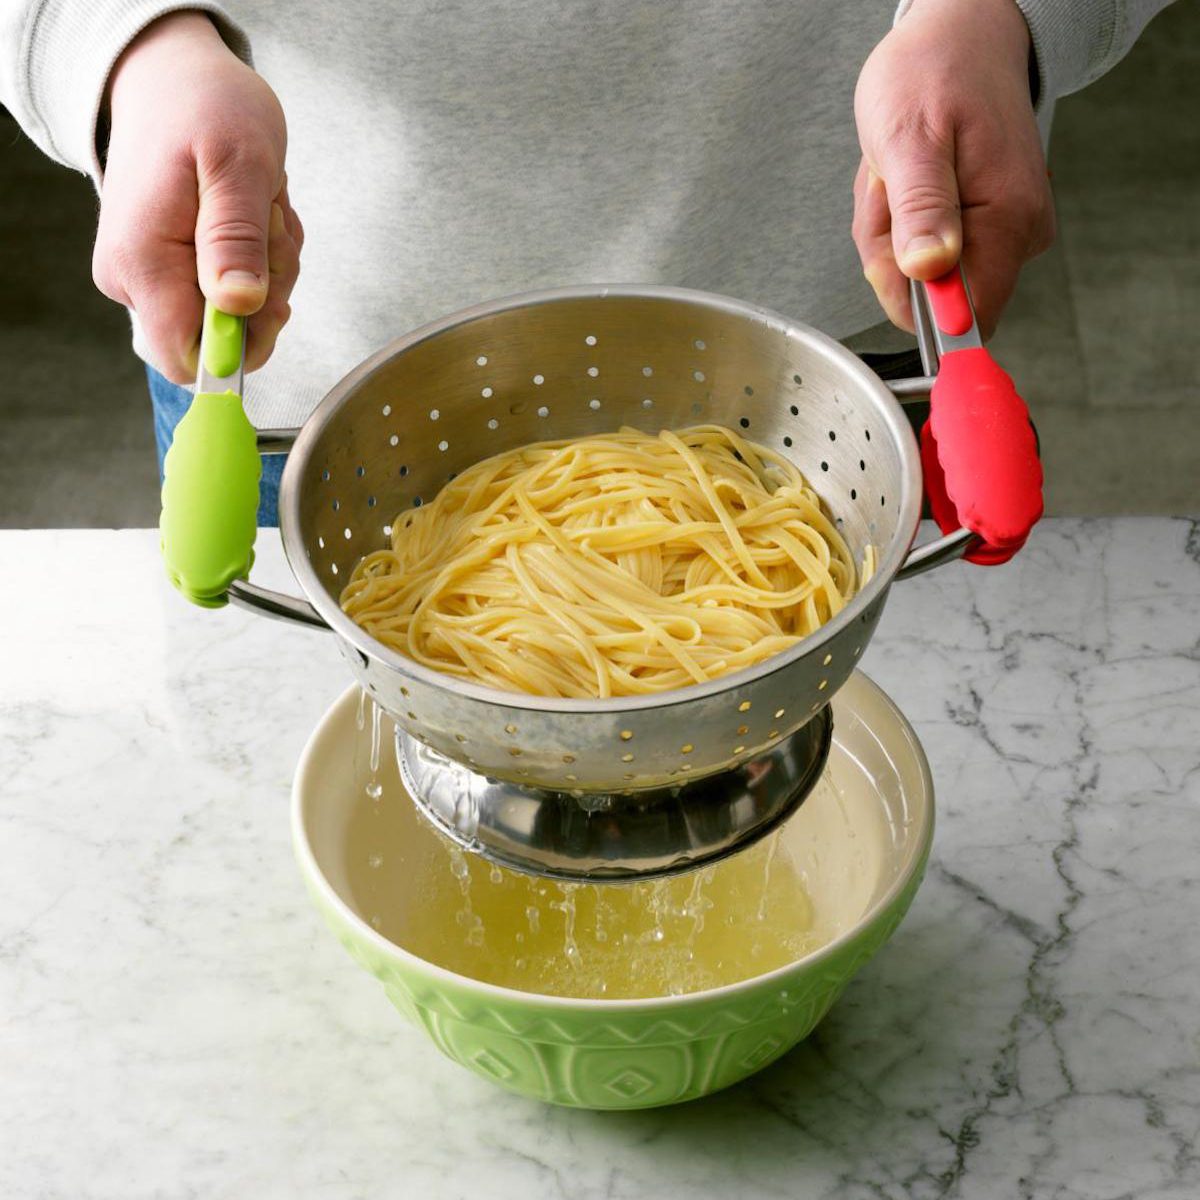 8 Clever Uses For Kitchen Tongs